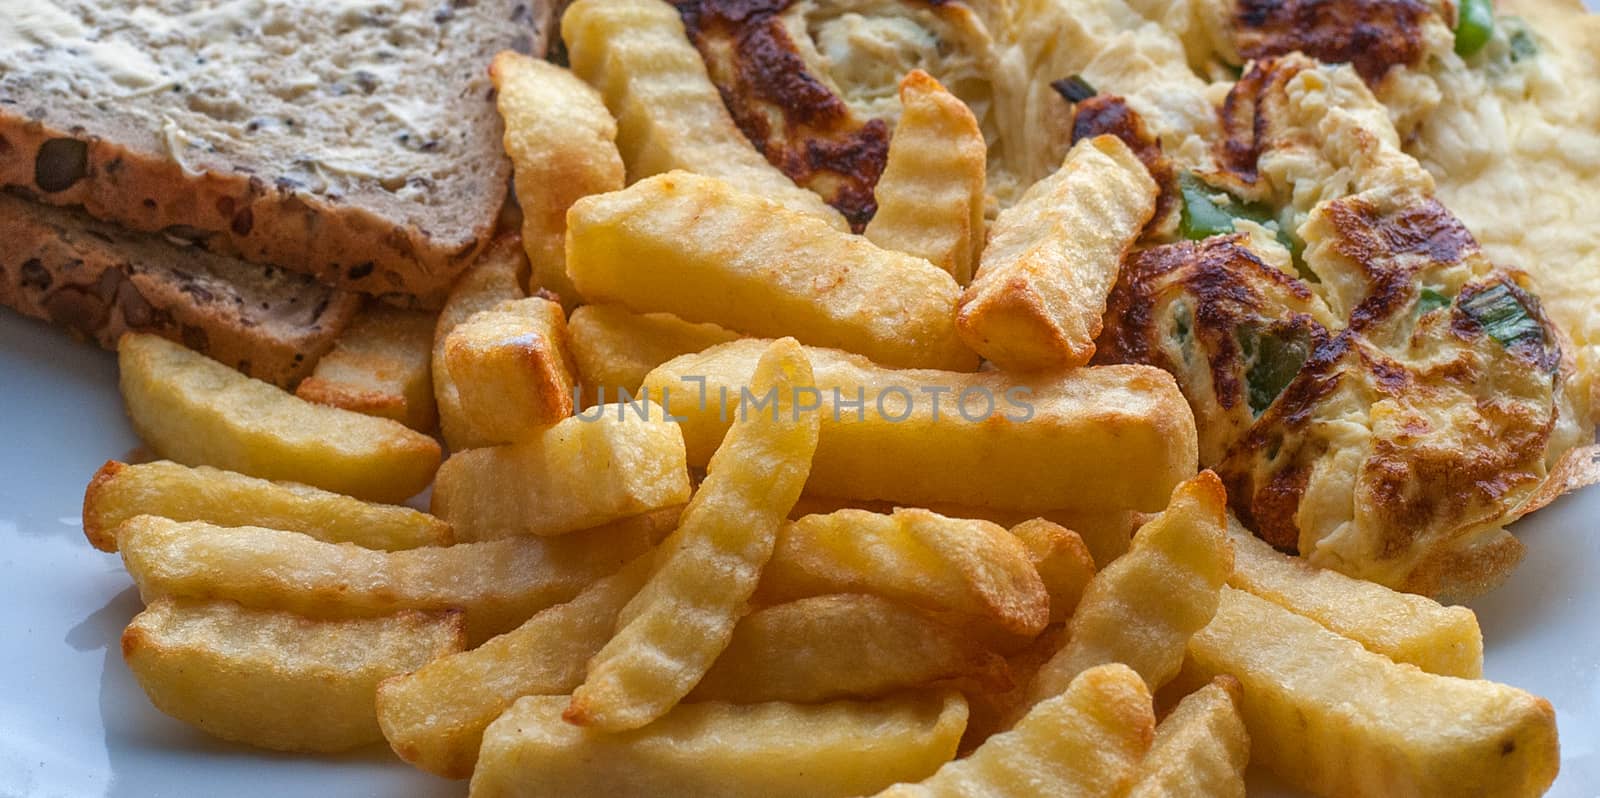 chips on a plate with omelette and brown bread by sirspread